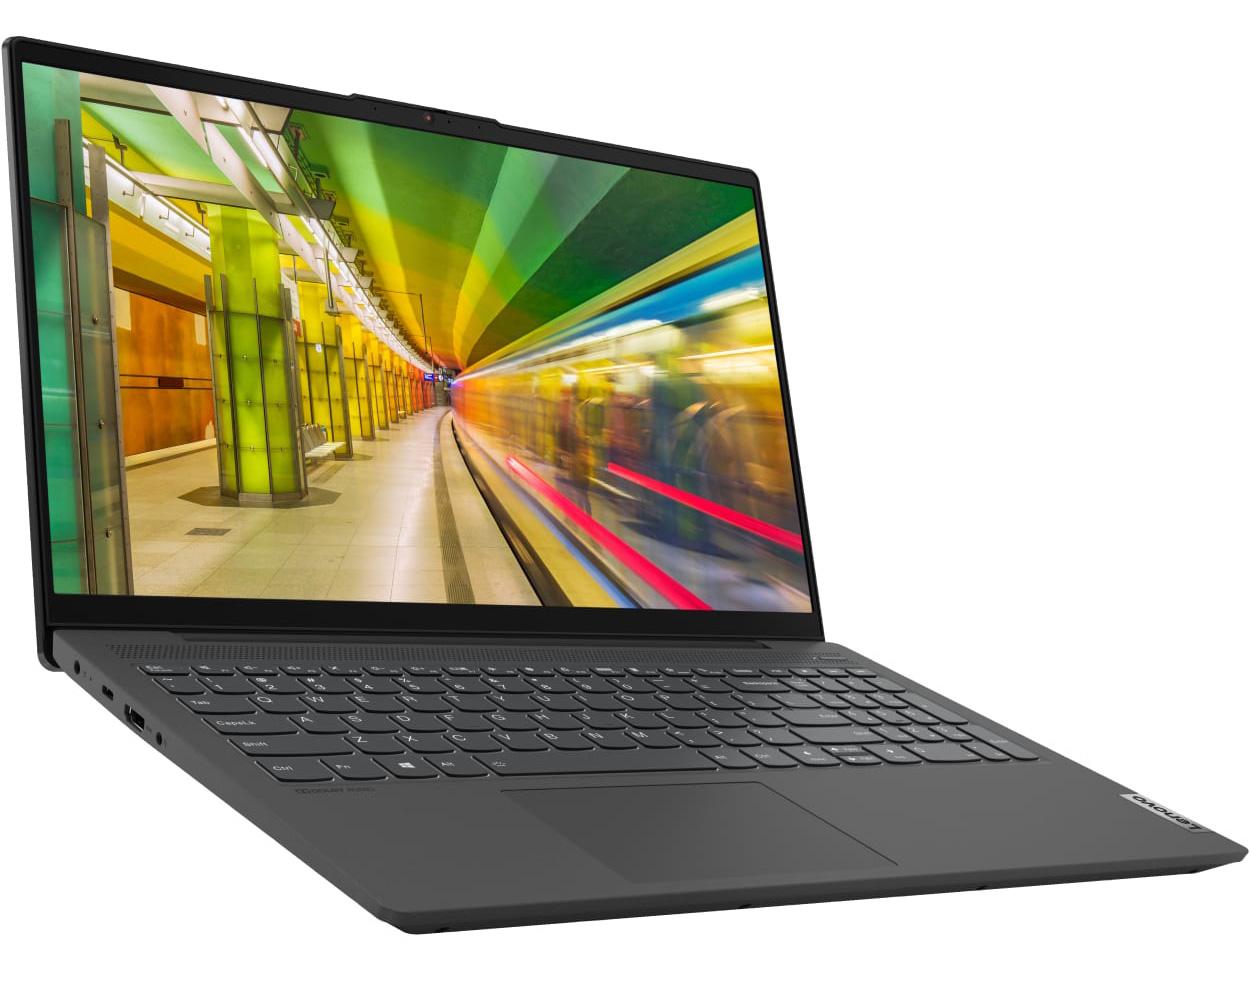 Lenovo IdeaPad 5 15.6in 8GB 256GB Notebook Laptop for $474.99 Shipped